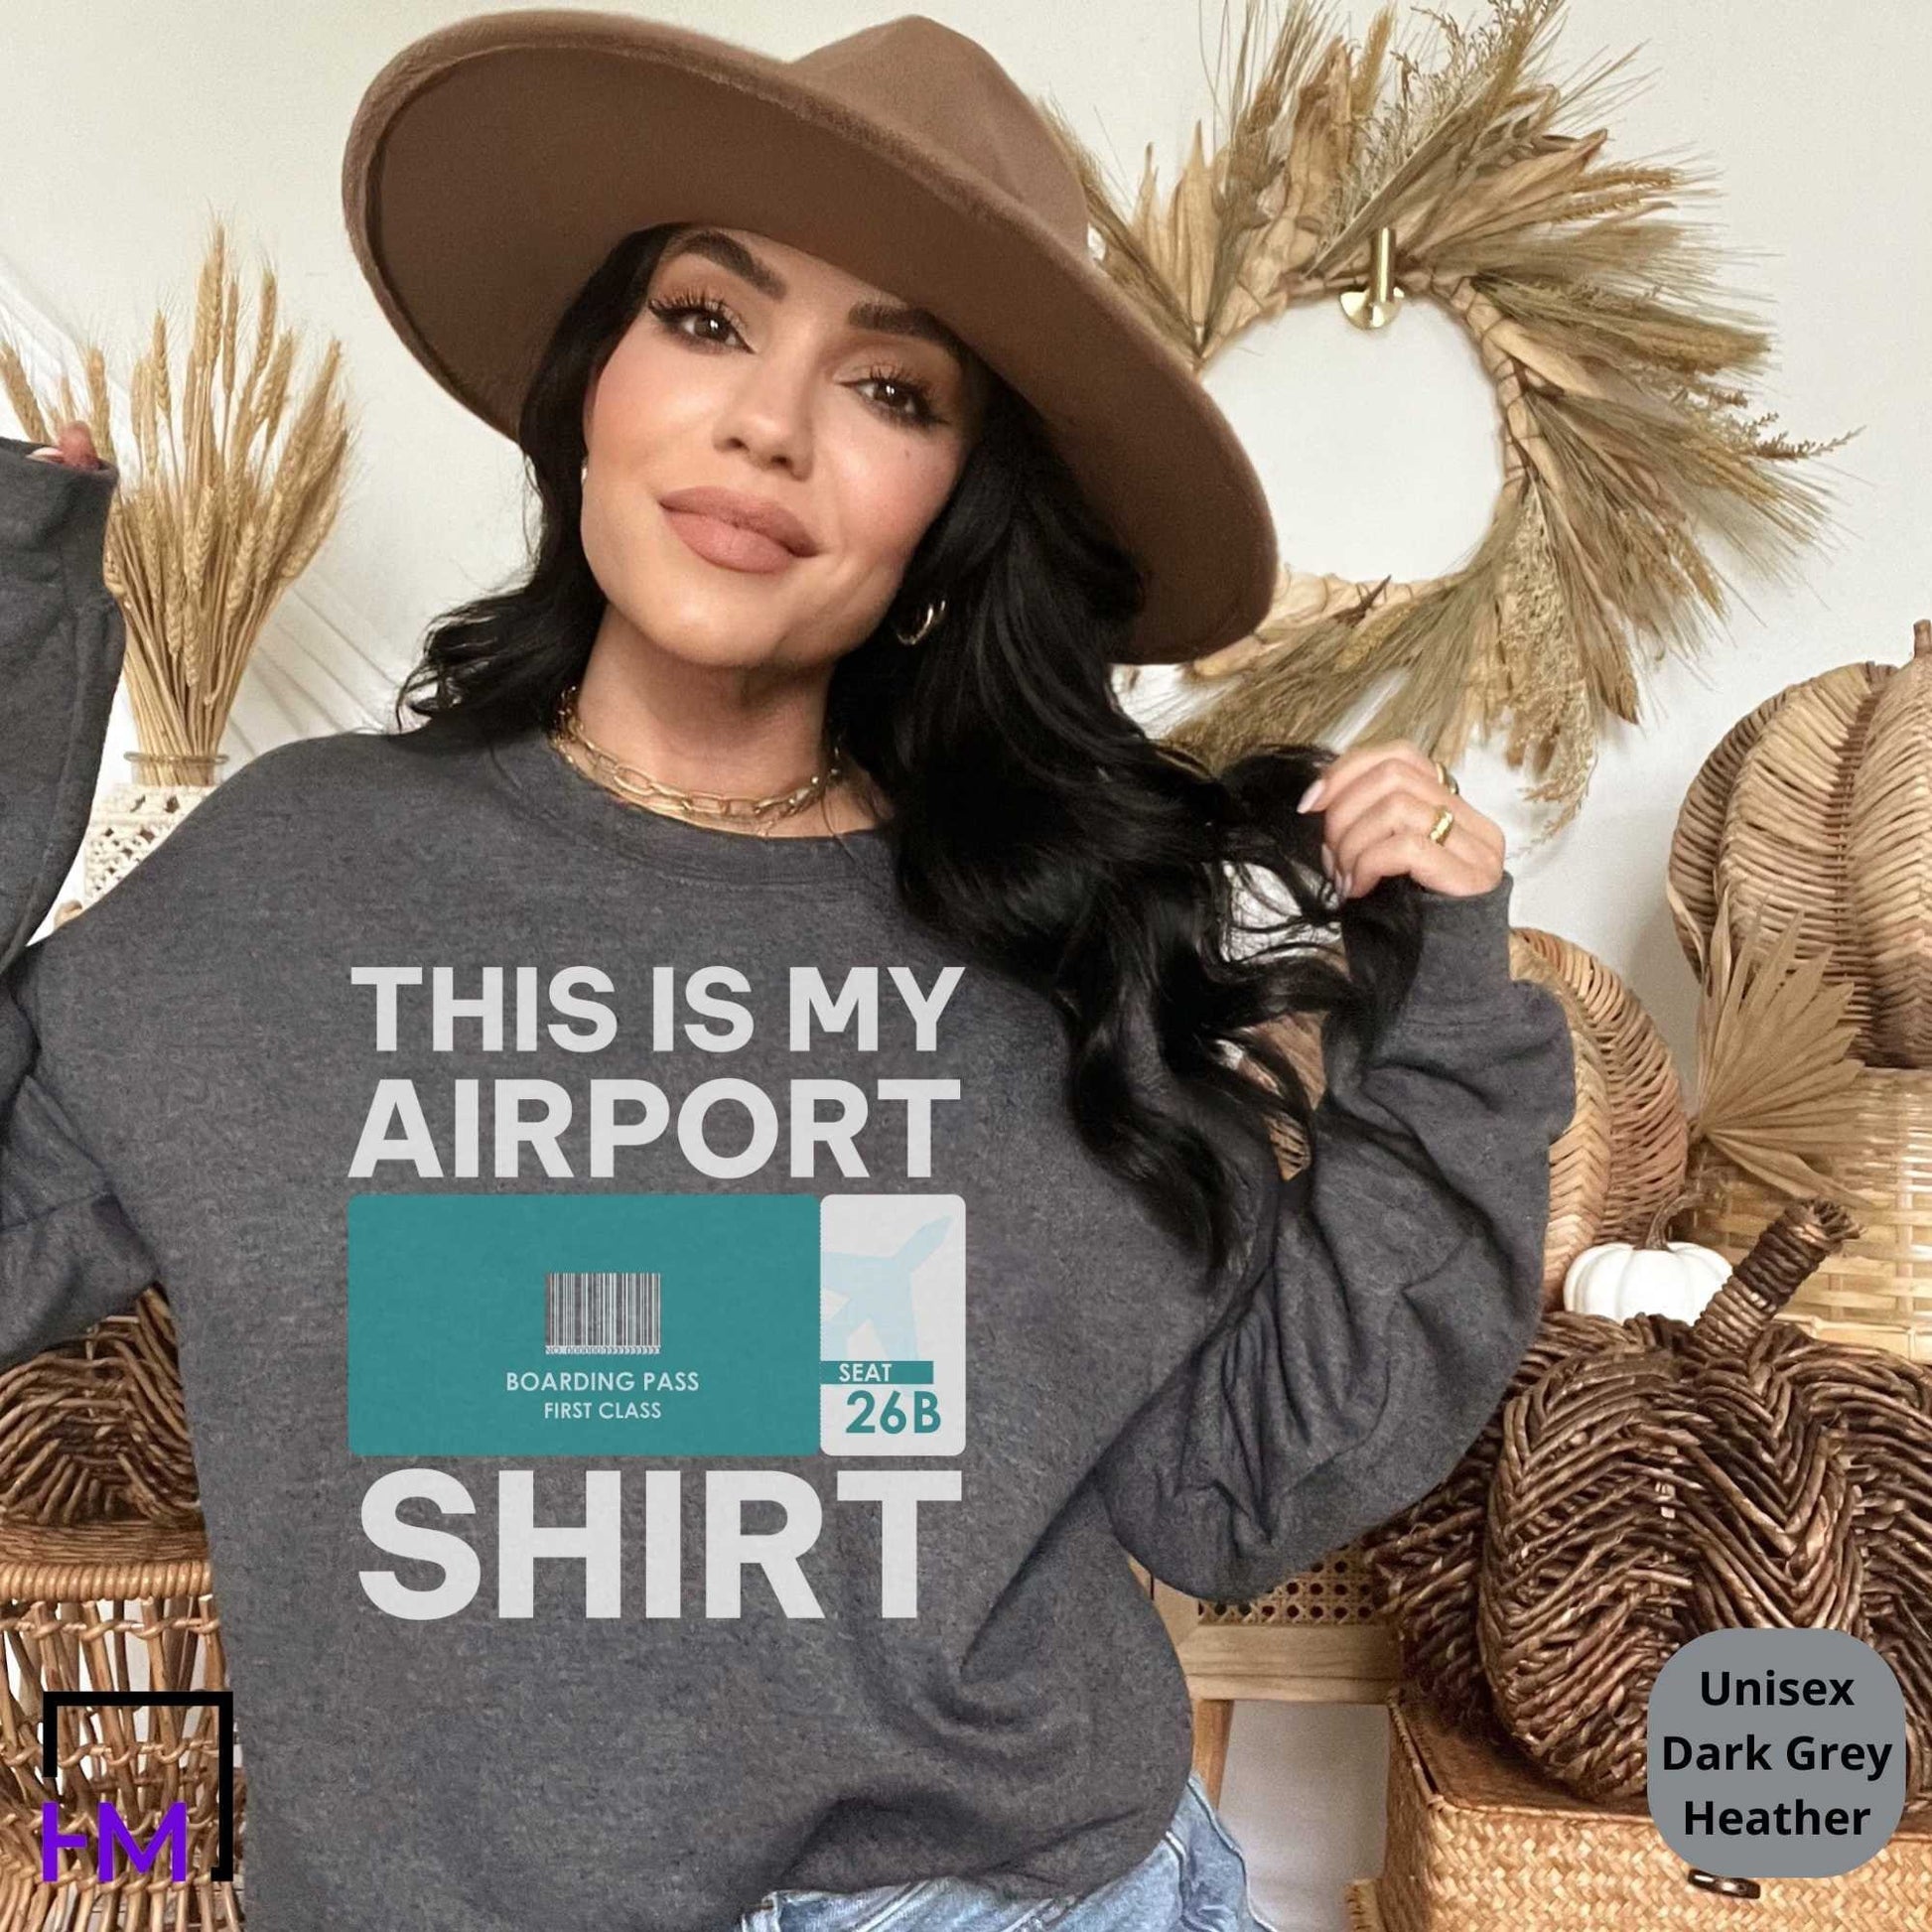 Funny Airport Shirt | Pilots, Flight Attendants, Frequent Fliers, Vacationers, Girls Sisters Trip, Mother Daughter Vacation, Besties Reunion HMDesignStudioUS